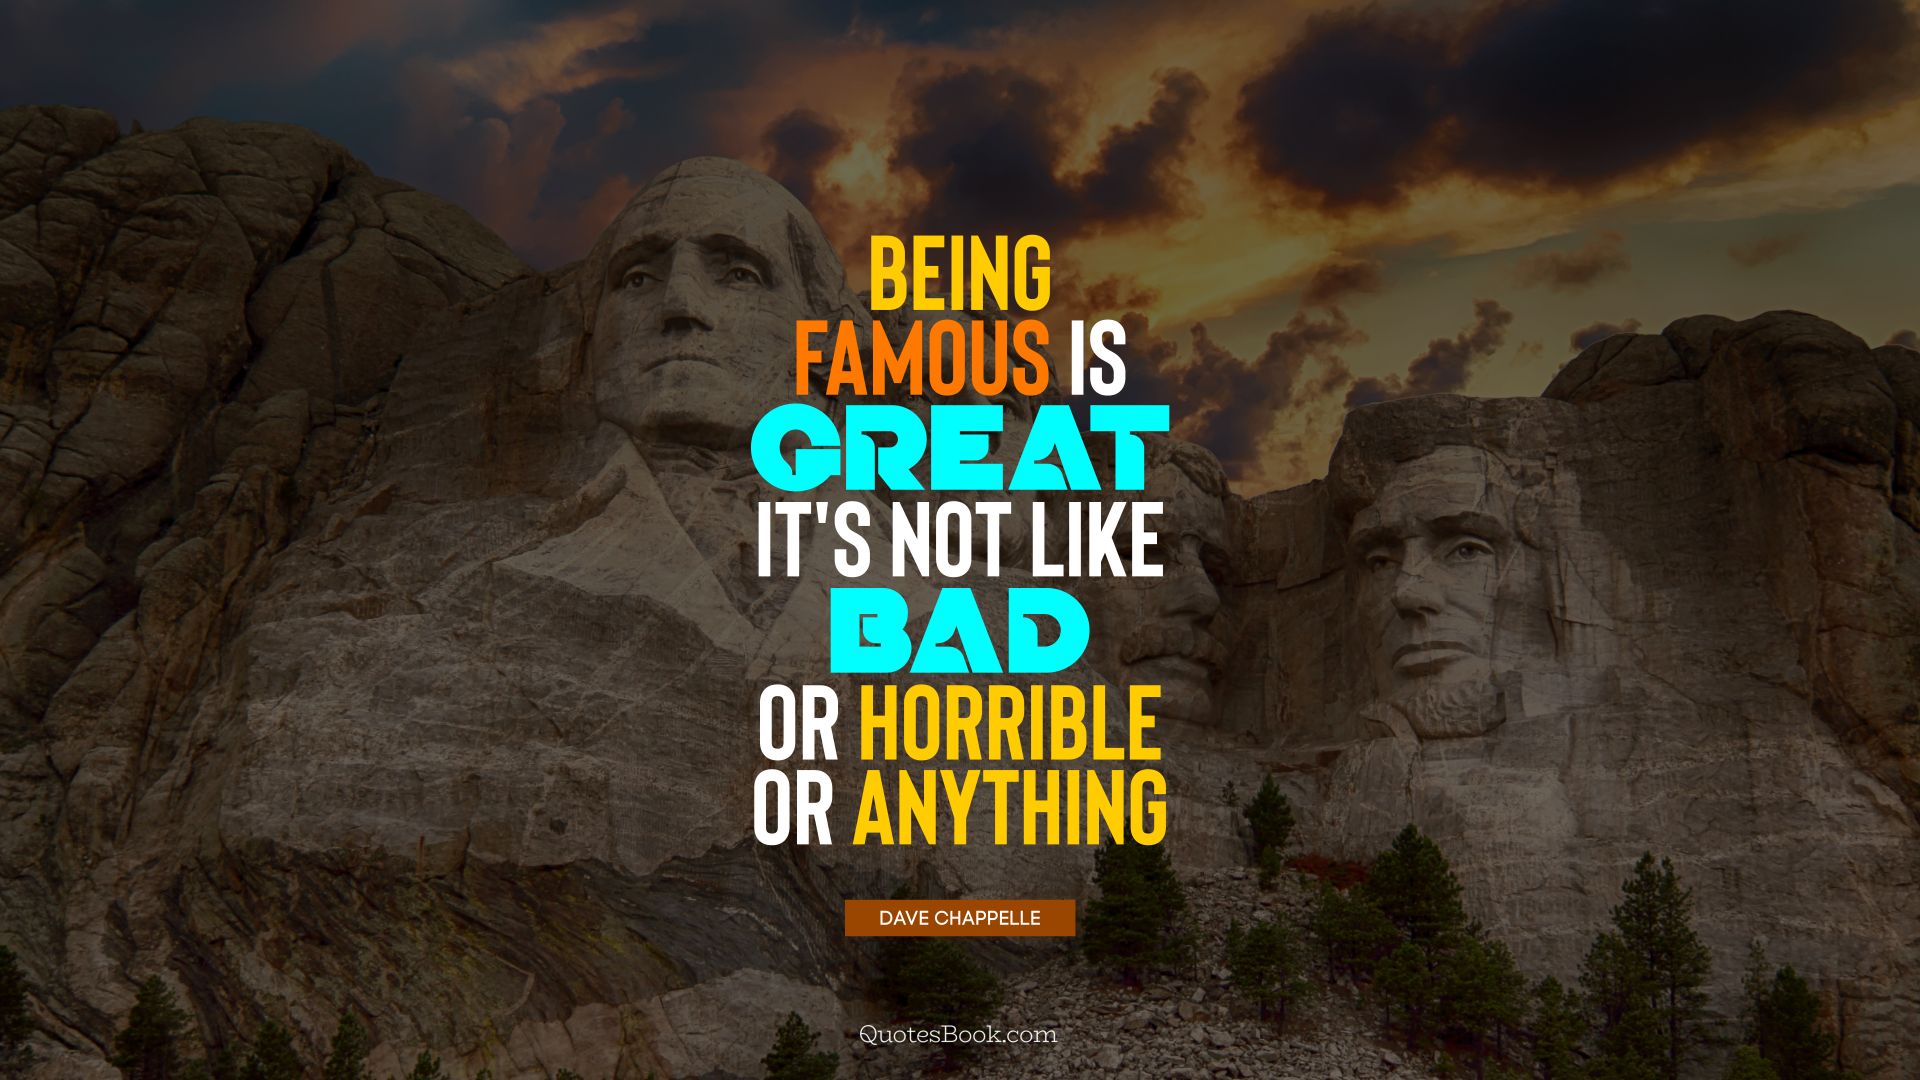 Being famous is great, it's not like bad or horrible or anything. - Quote by Dave Chappelle